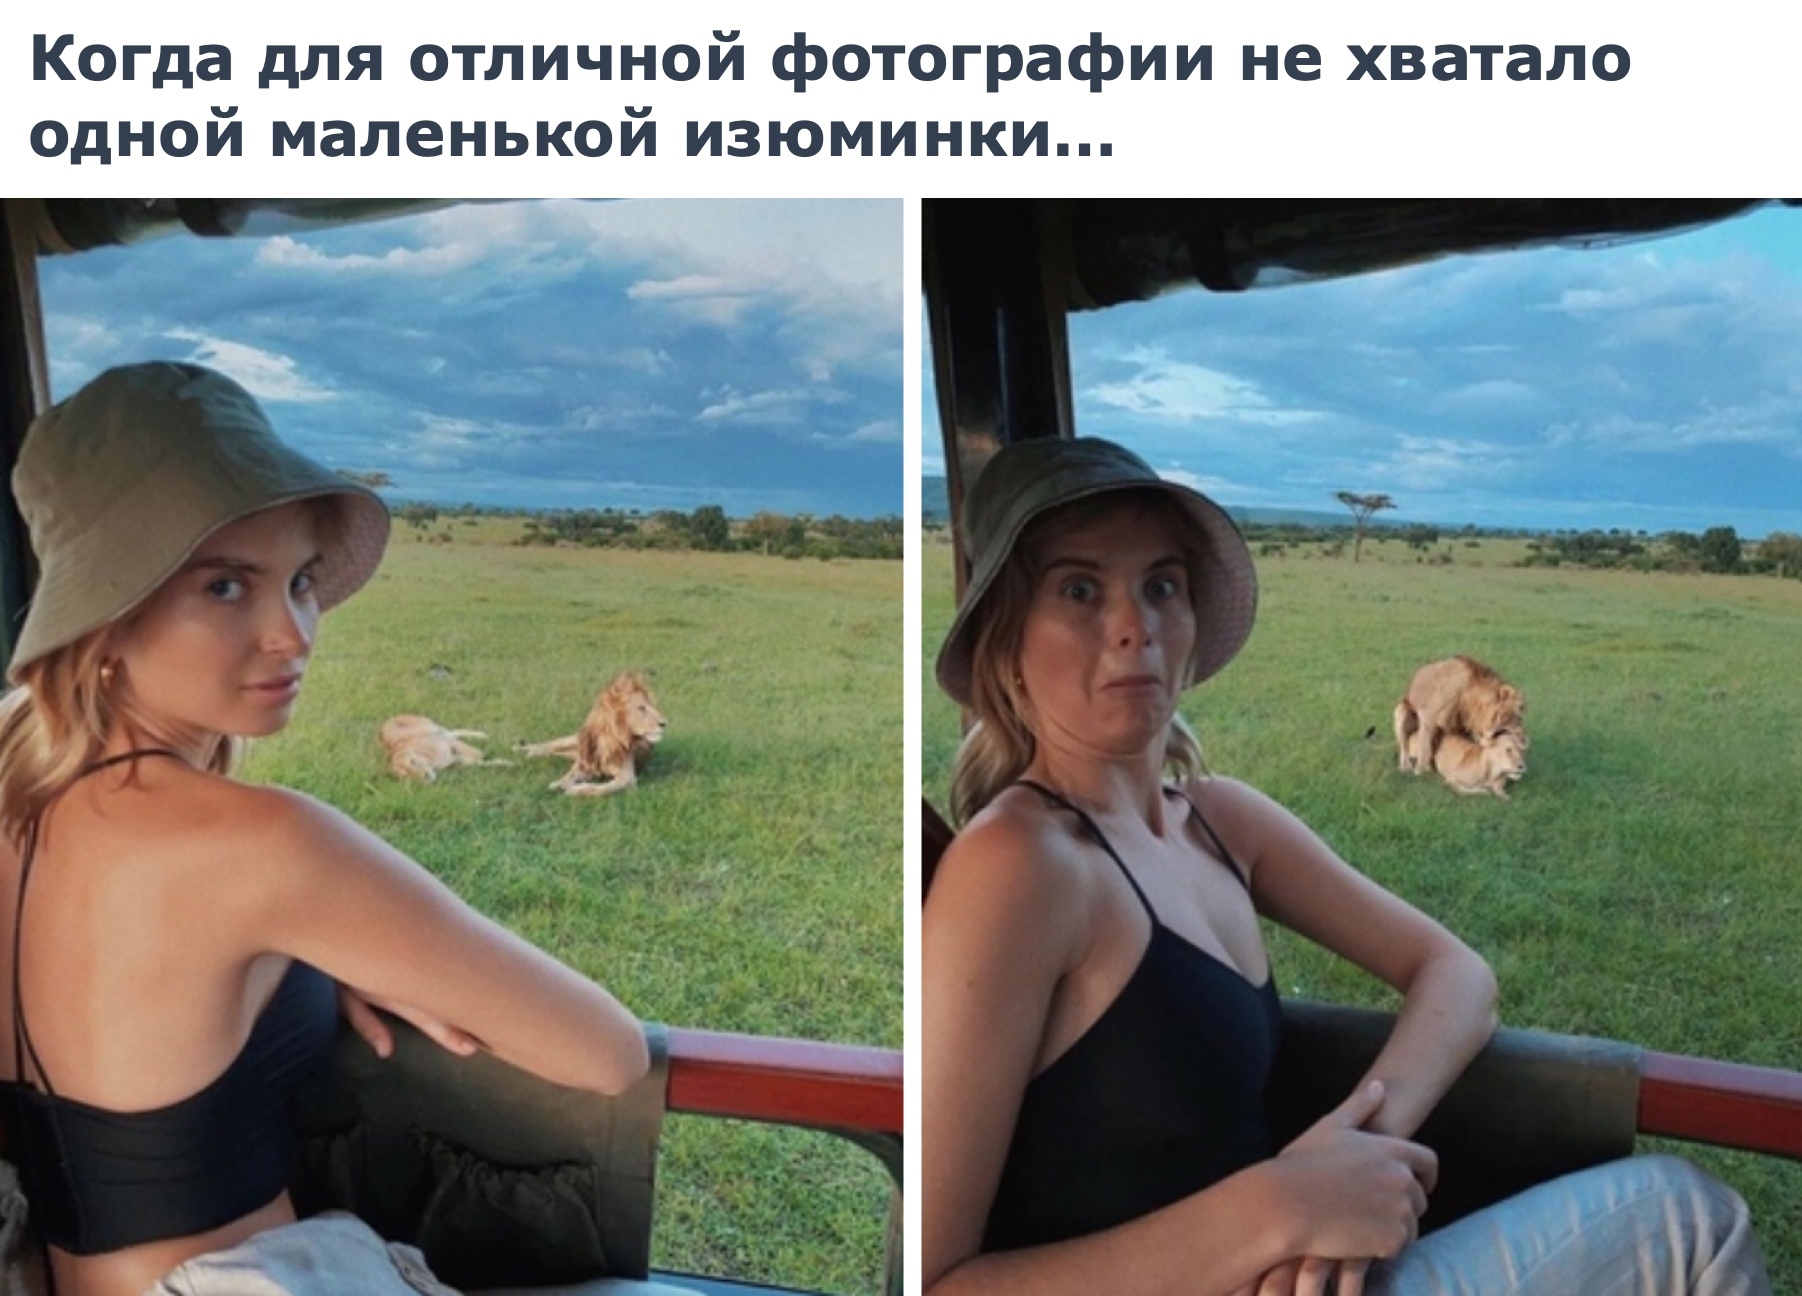 In! Great photo! on the right!))) - The photo, a lion, Lioness, Humor, Reproduction, Emotions, Suddenly, Picture with text